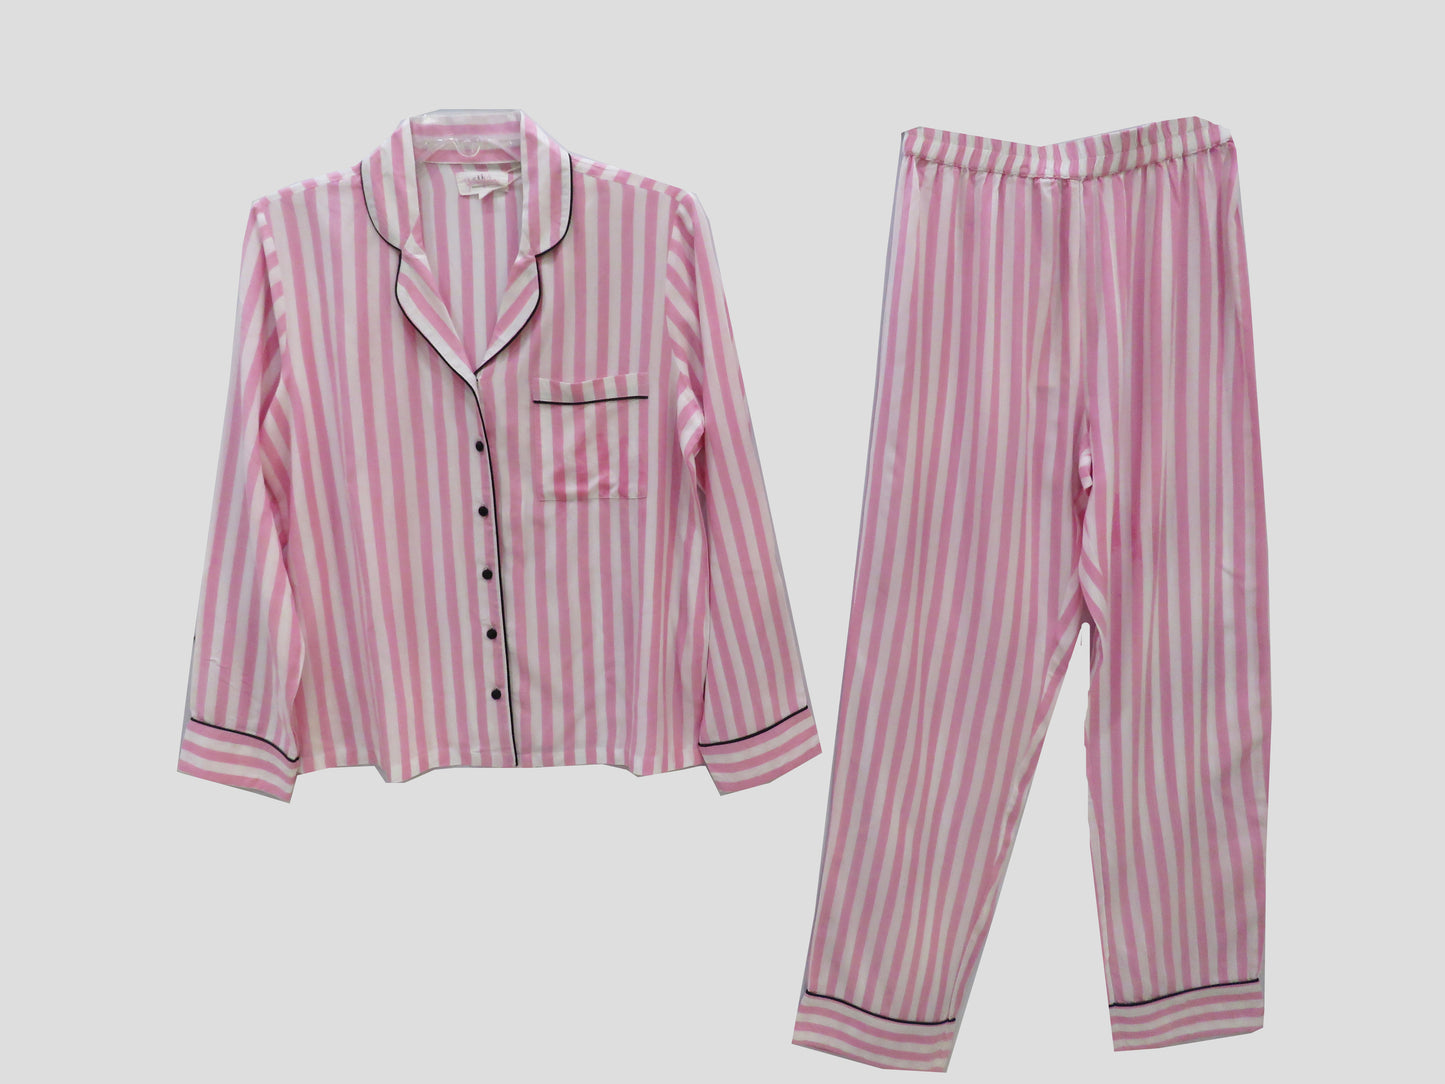 The Stunning 7 Peice Pink Nightsuit Set With Black Piping. Includes A Shirt, A Pair Pants,Shorts,Spaghetti Tops,Sleeping Mask, Scrunchie And A Pouch